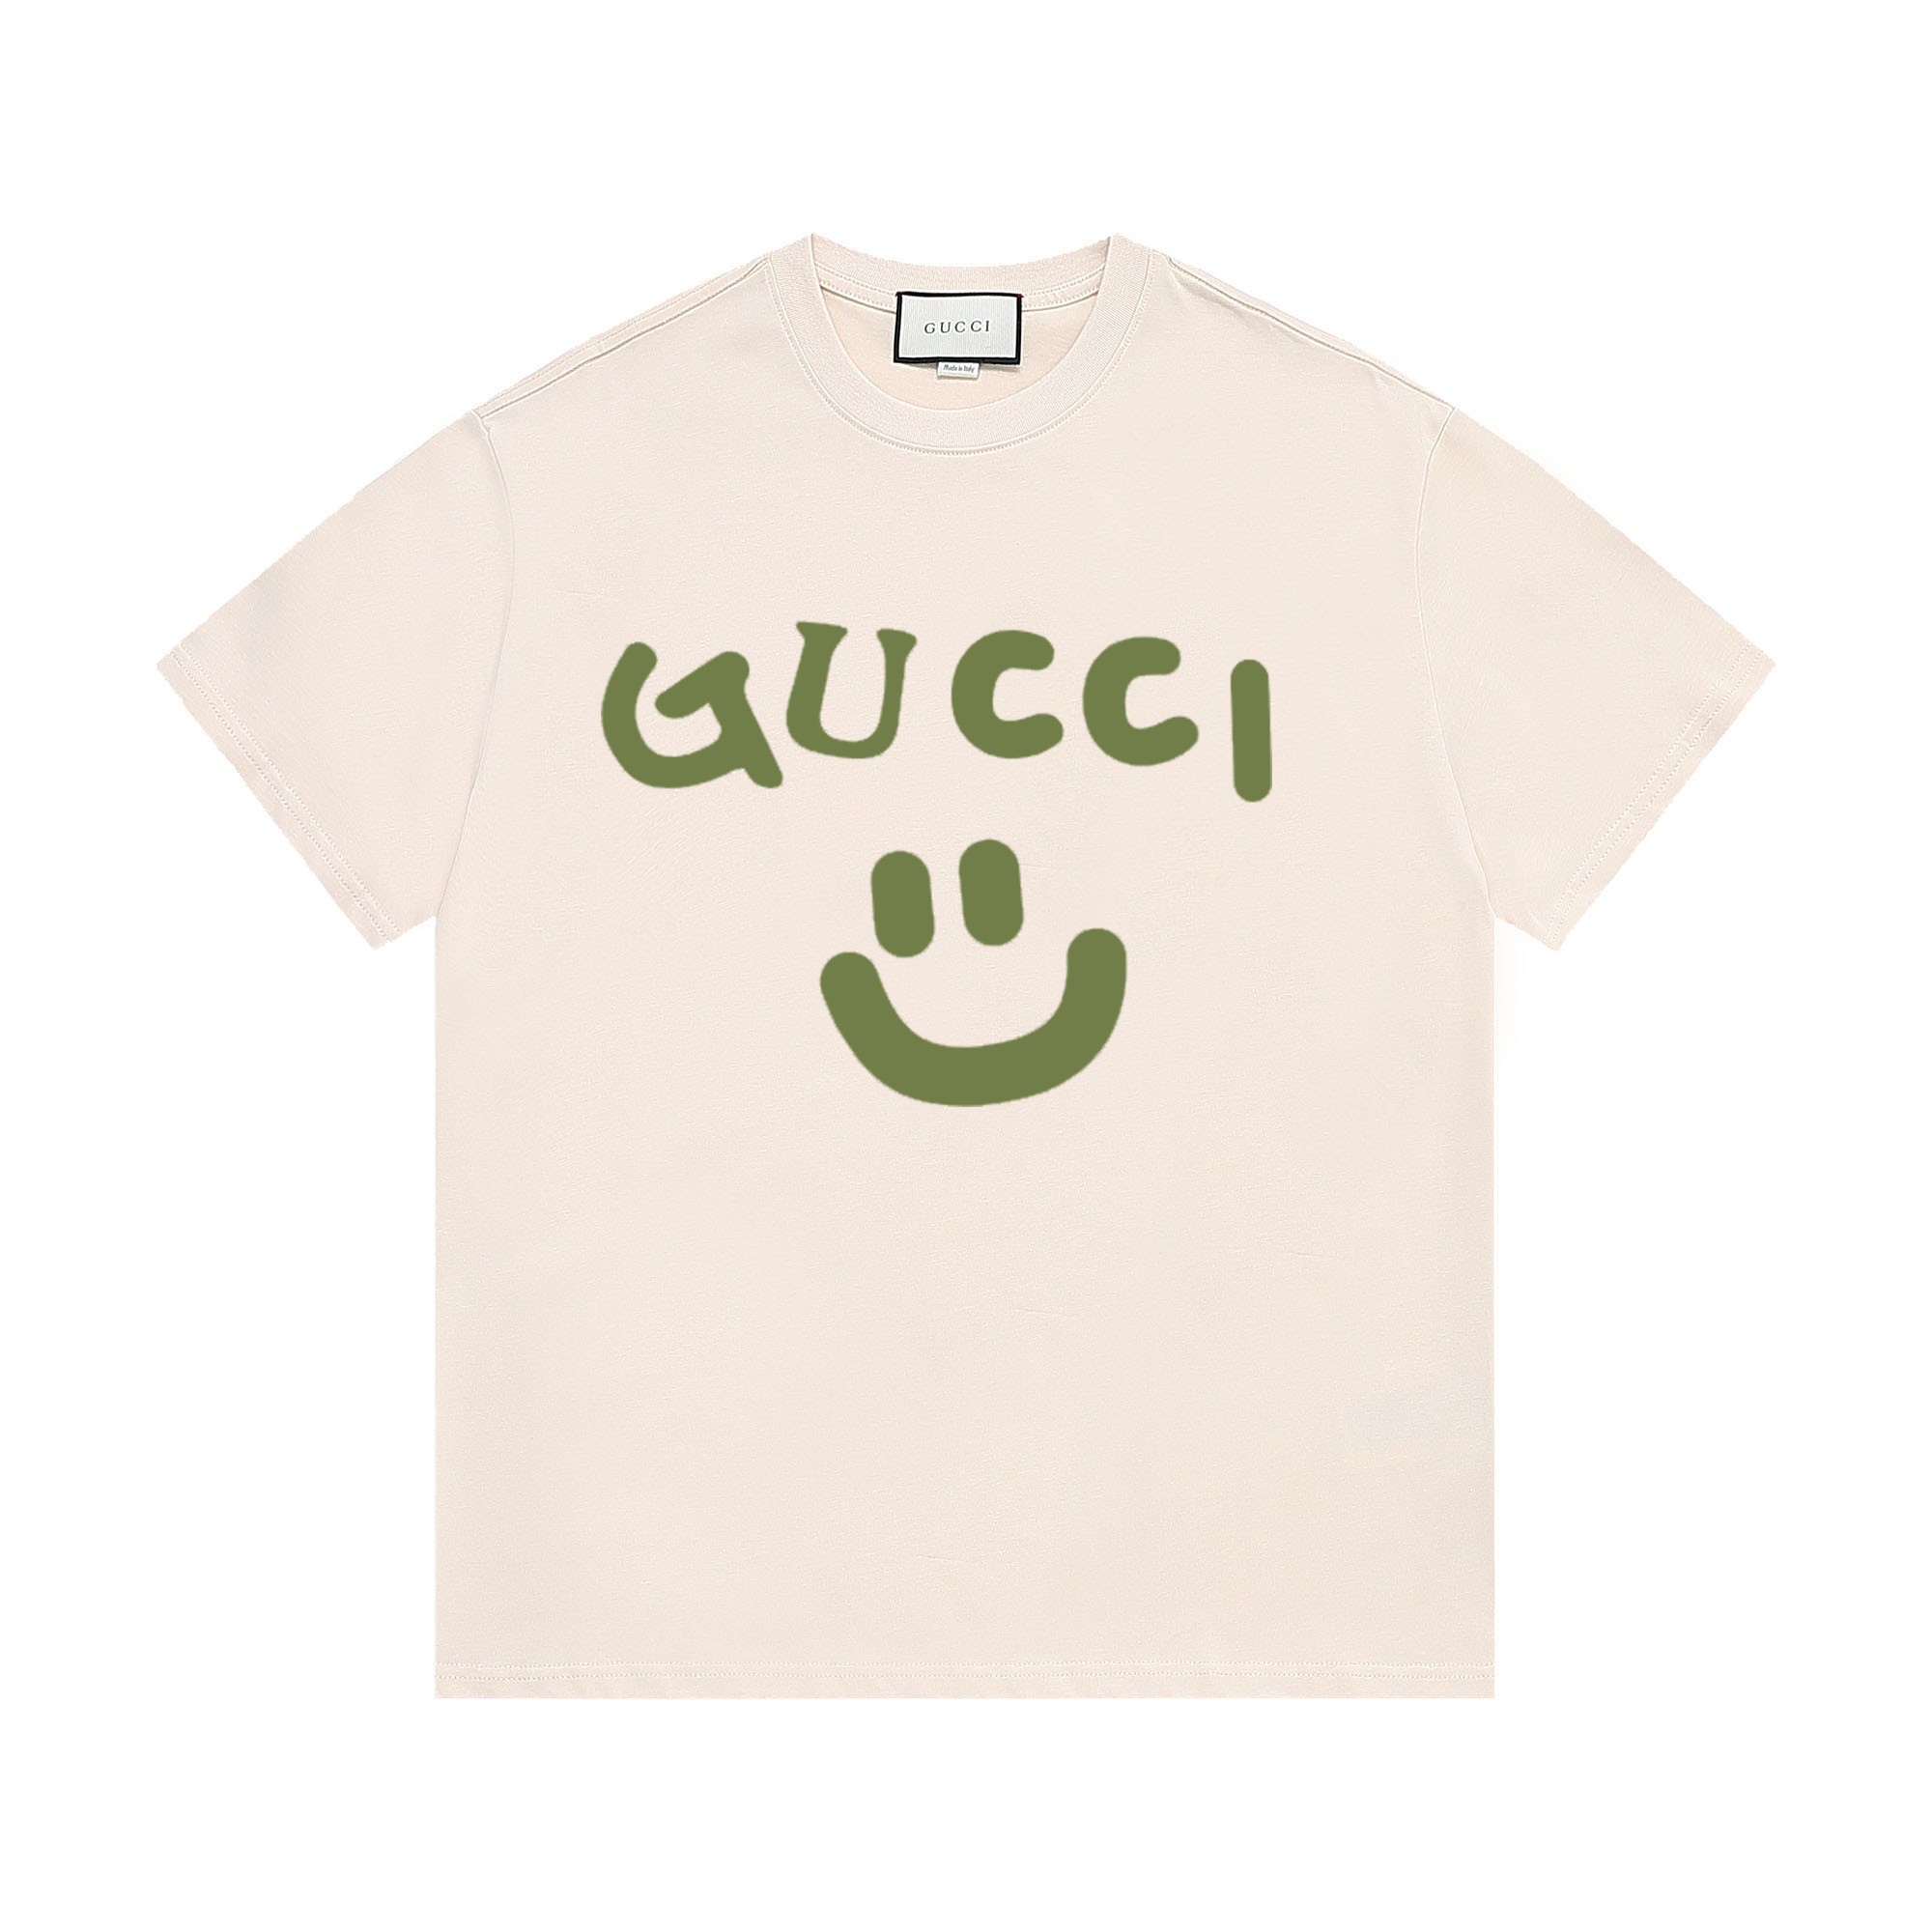 Gucci Clothing T-Shirt Apricot Color Black Printing Cotton Spring Collection Short Sleeve